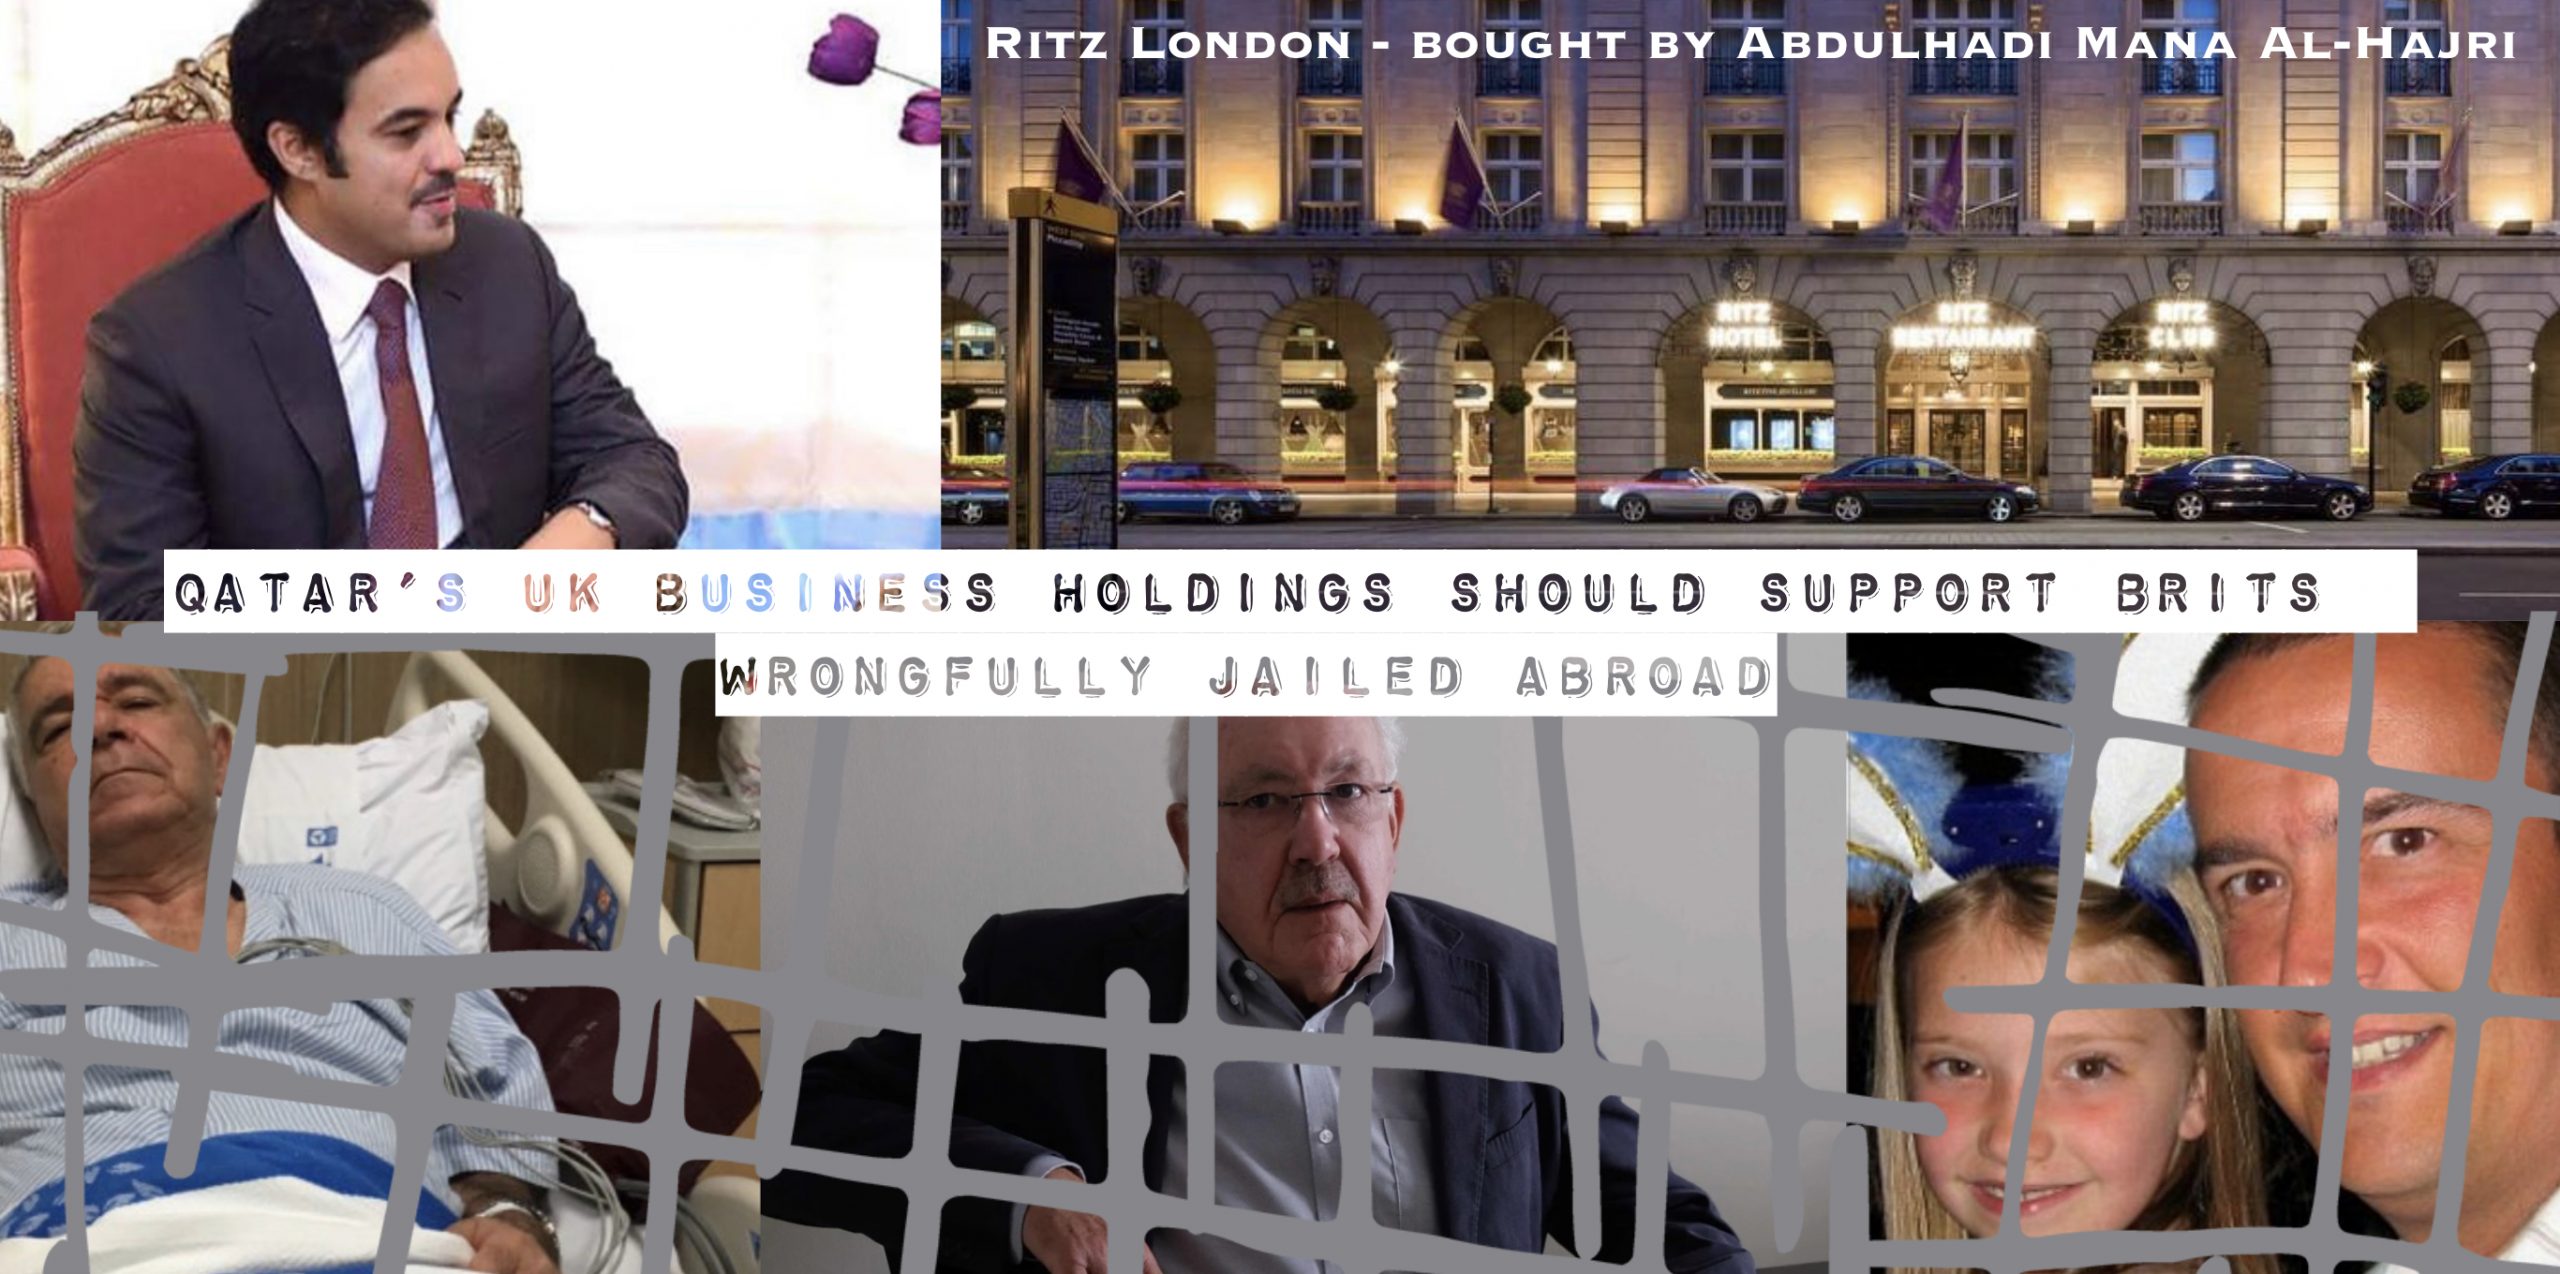 Stirling: Qatar’s UK business holdings should support wrongfully detained expats